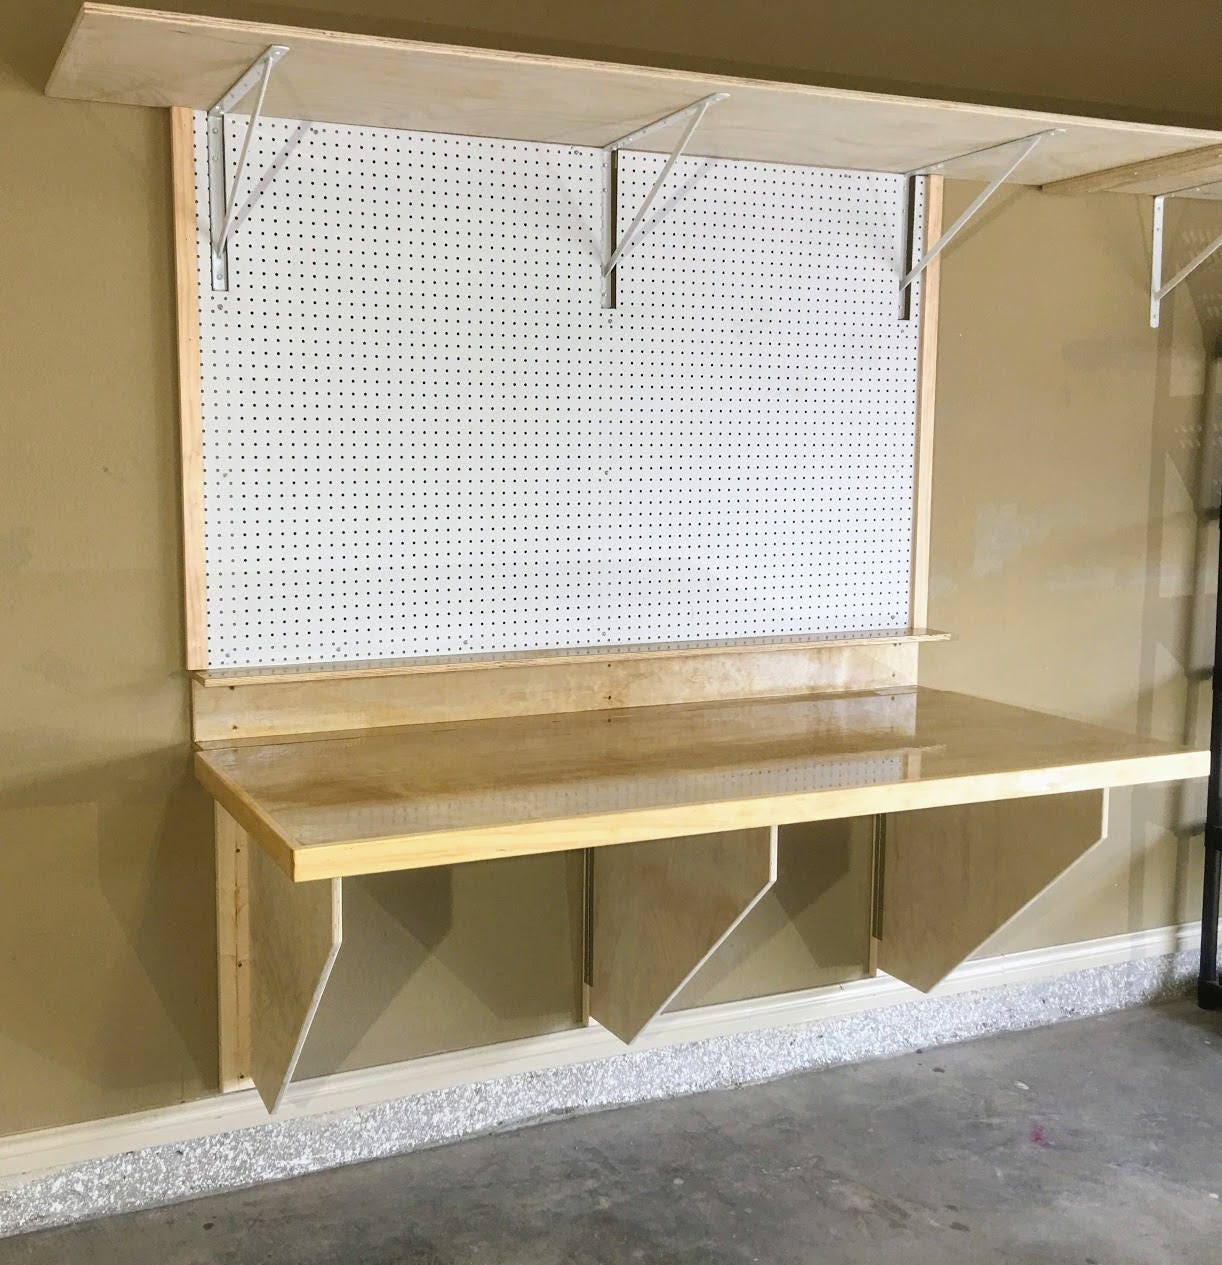 DIY Folding Workbench Plans Easy to Follow Plans to Build a - Etsy